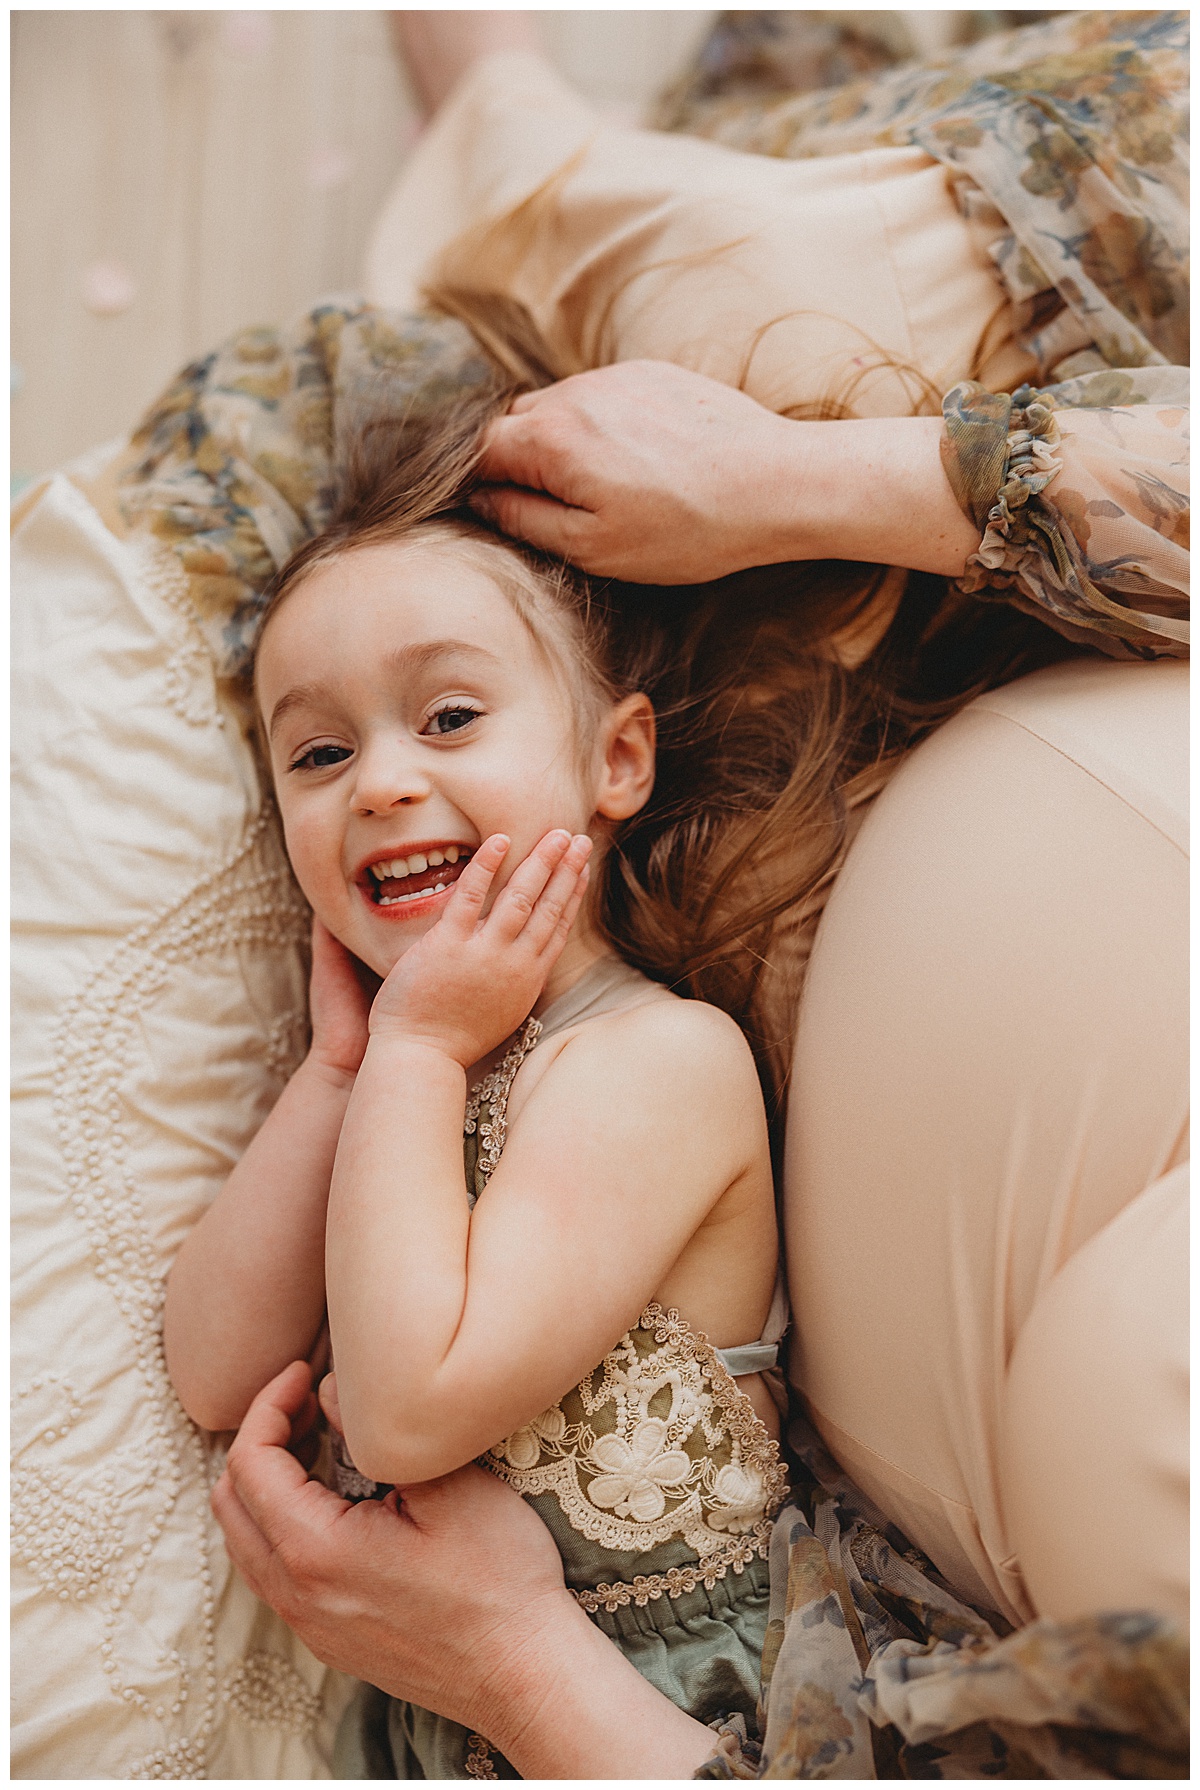 Pregnant mom embraces belly and young daughter for Norma Fayak Photography